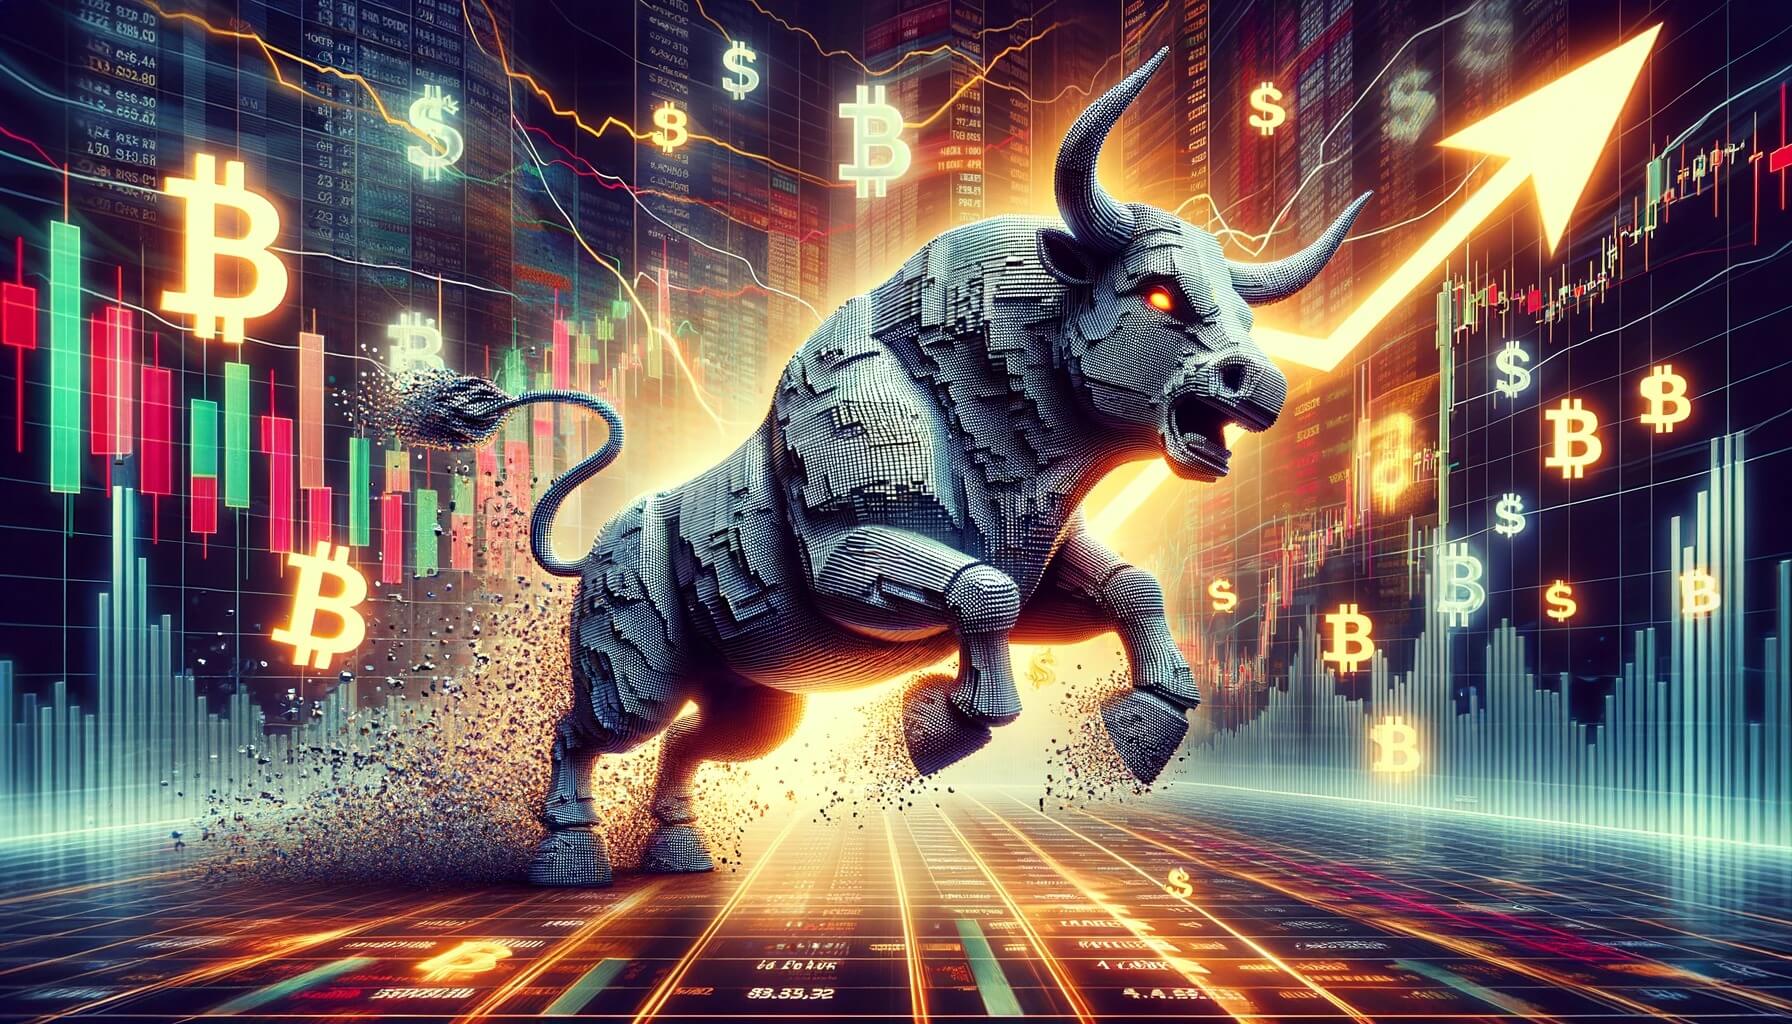 A raging bull made of pixelated Bitcoin symbols charging upwards through charts and graphs, leaving a trail of dollar signs in its wake.